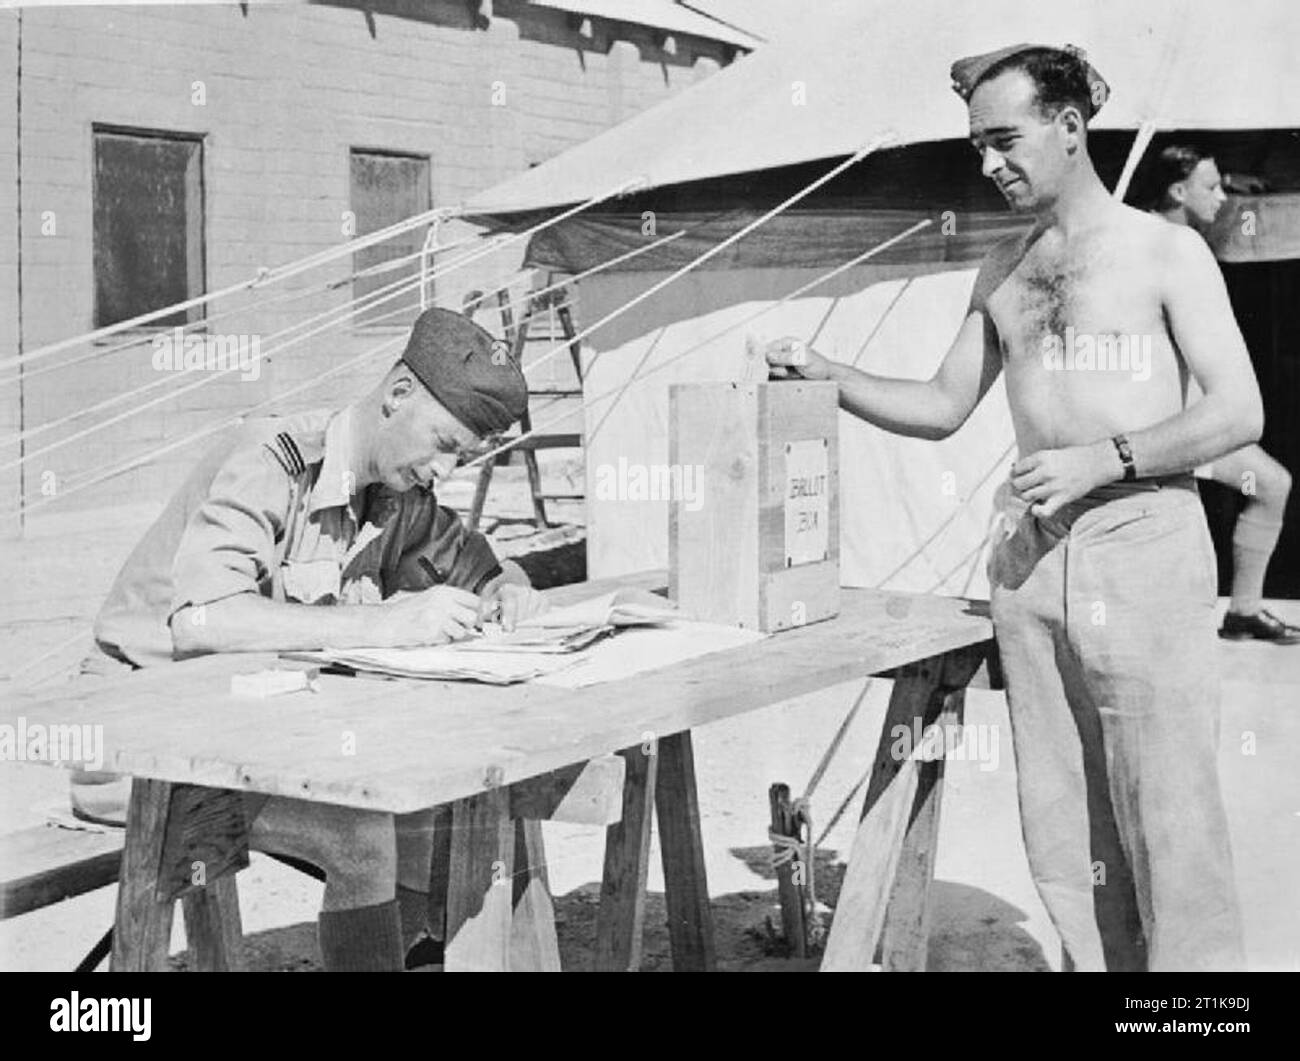 Royal Air Force in the Middle East, 1944-1945. Leading Aircraftman McLeash of Musselburgh, Scotland, serving with an RAF Squadron in North Africa, drops his paper into the ballot box outside a polling booth marquee, during voting for the 1945 General Election. Stock Photo